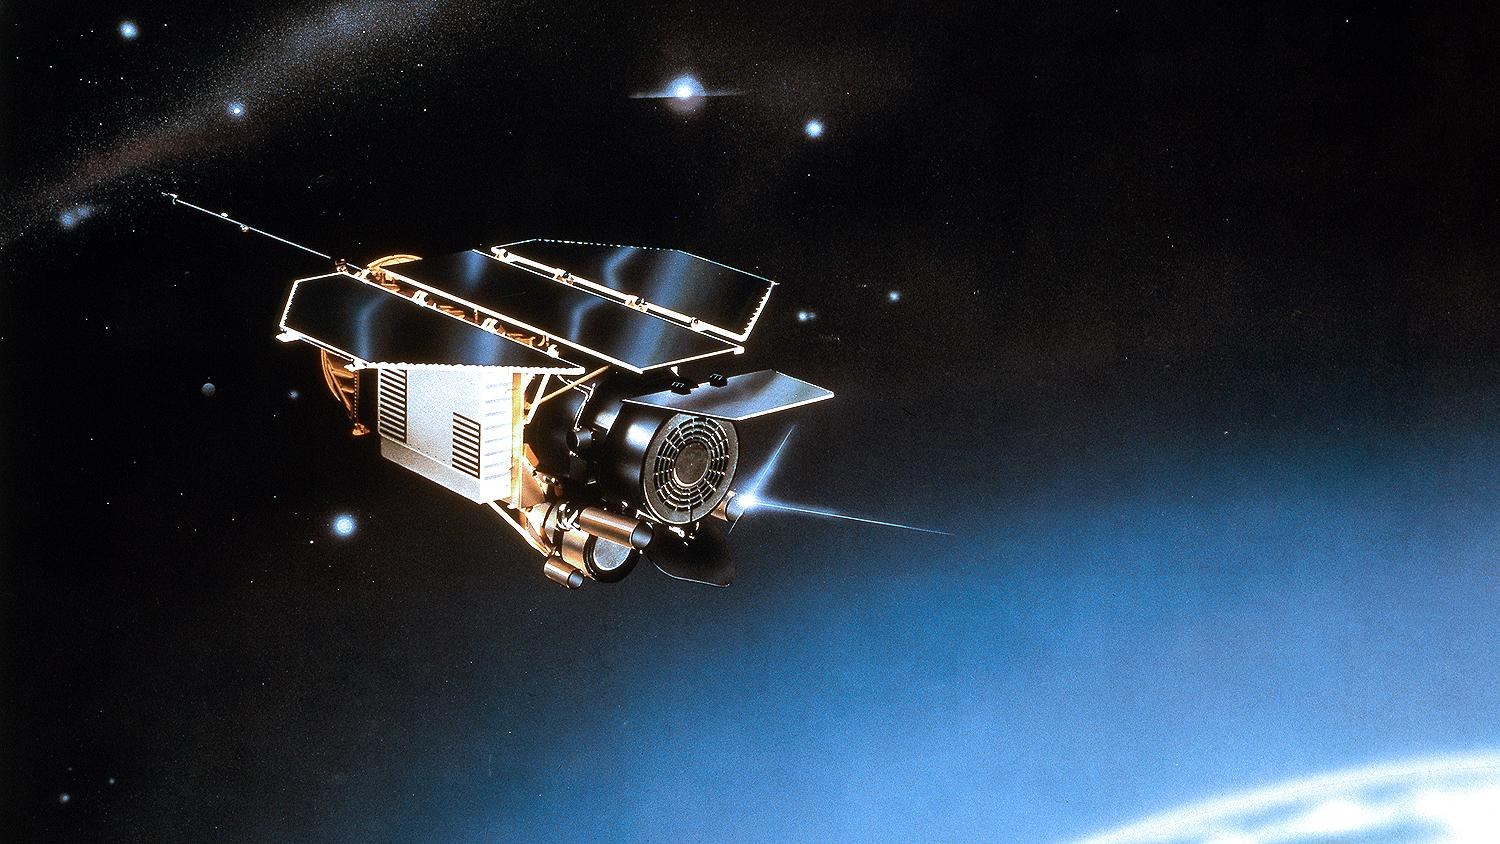 Artist's impression of the ROSAT satellite in space